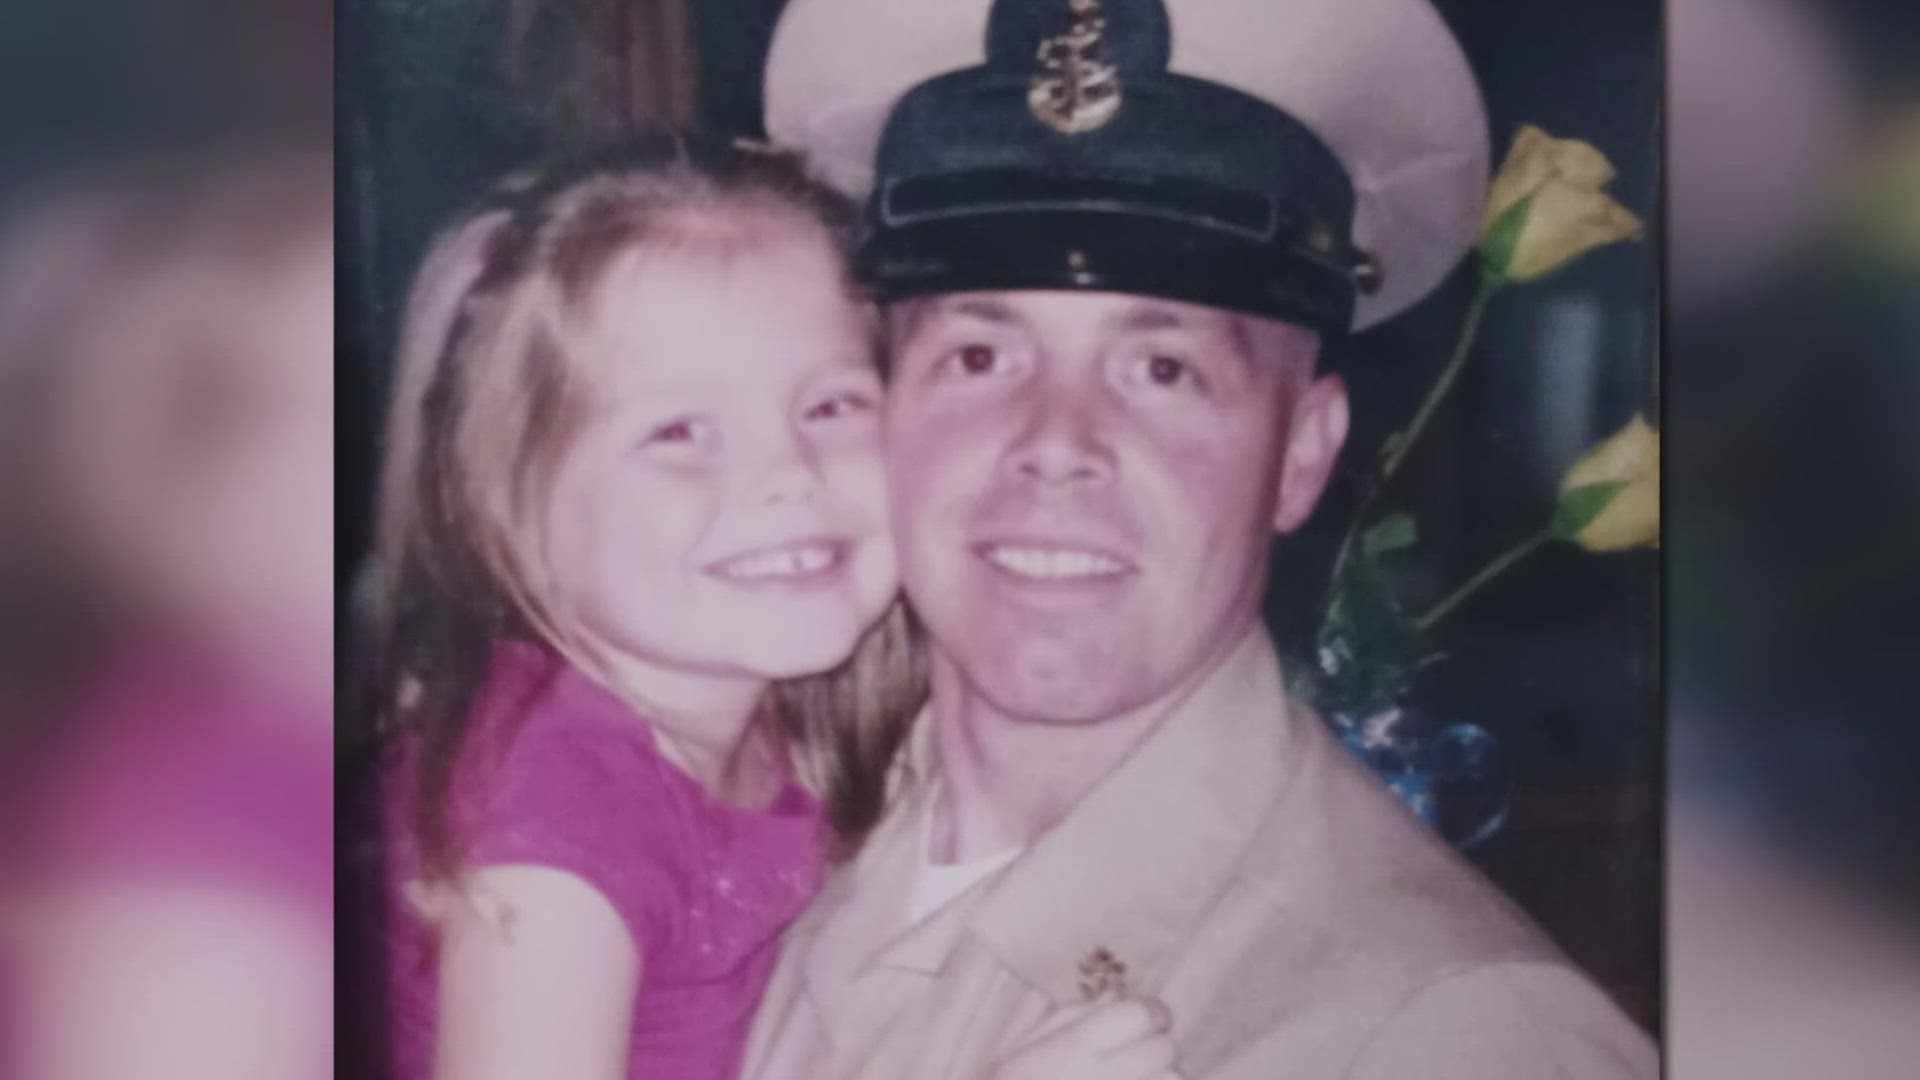 A Navy veteran of 20 years changed careers at the request of his daughter.